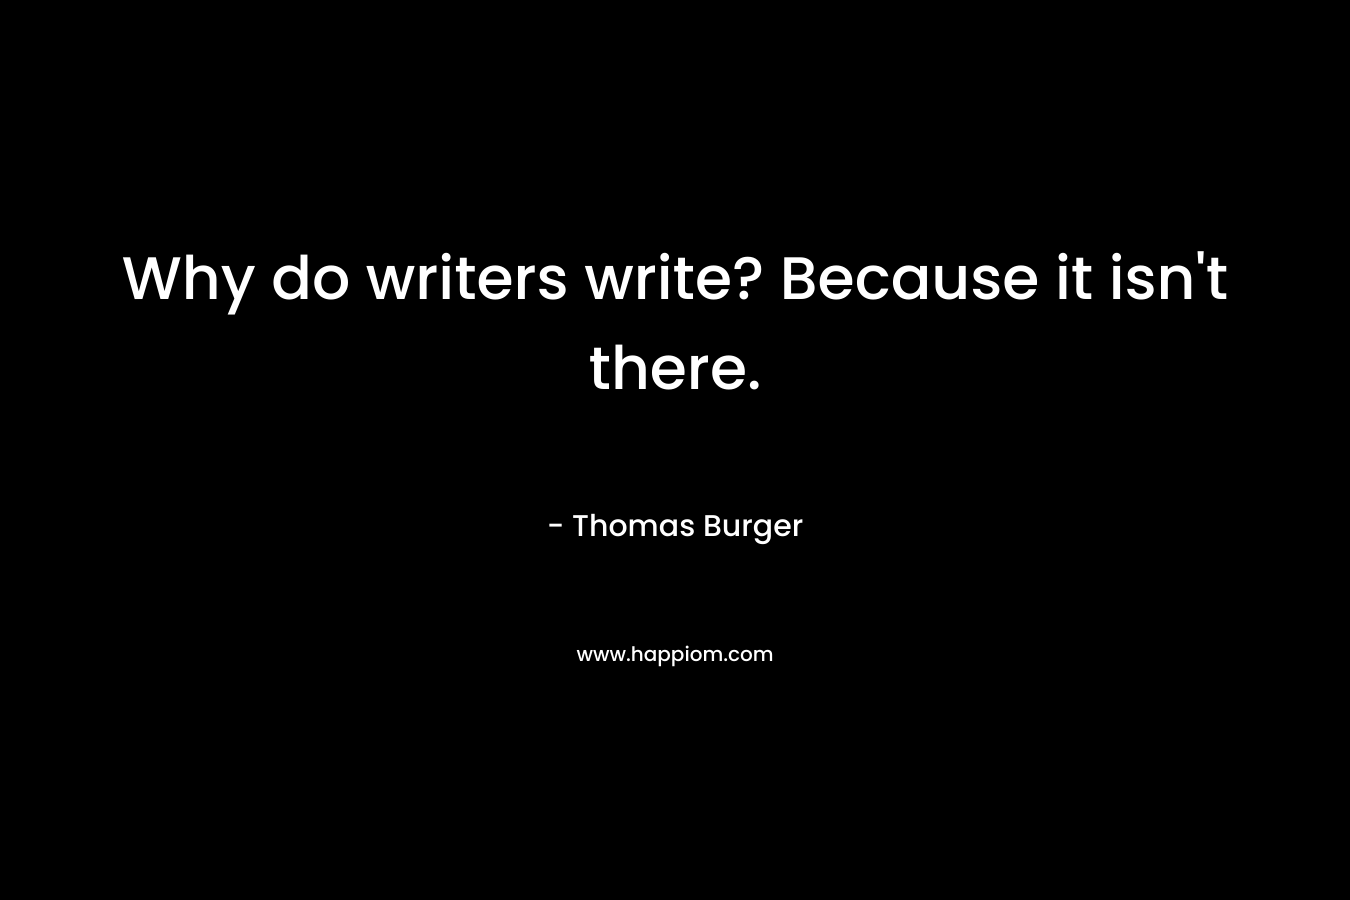 Why do writers write? Because it isn’t there. – Thomas Burger